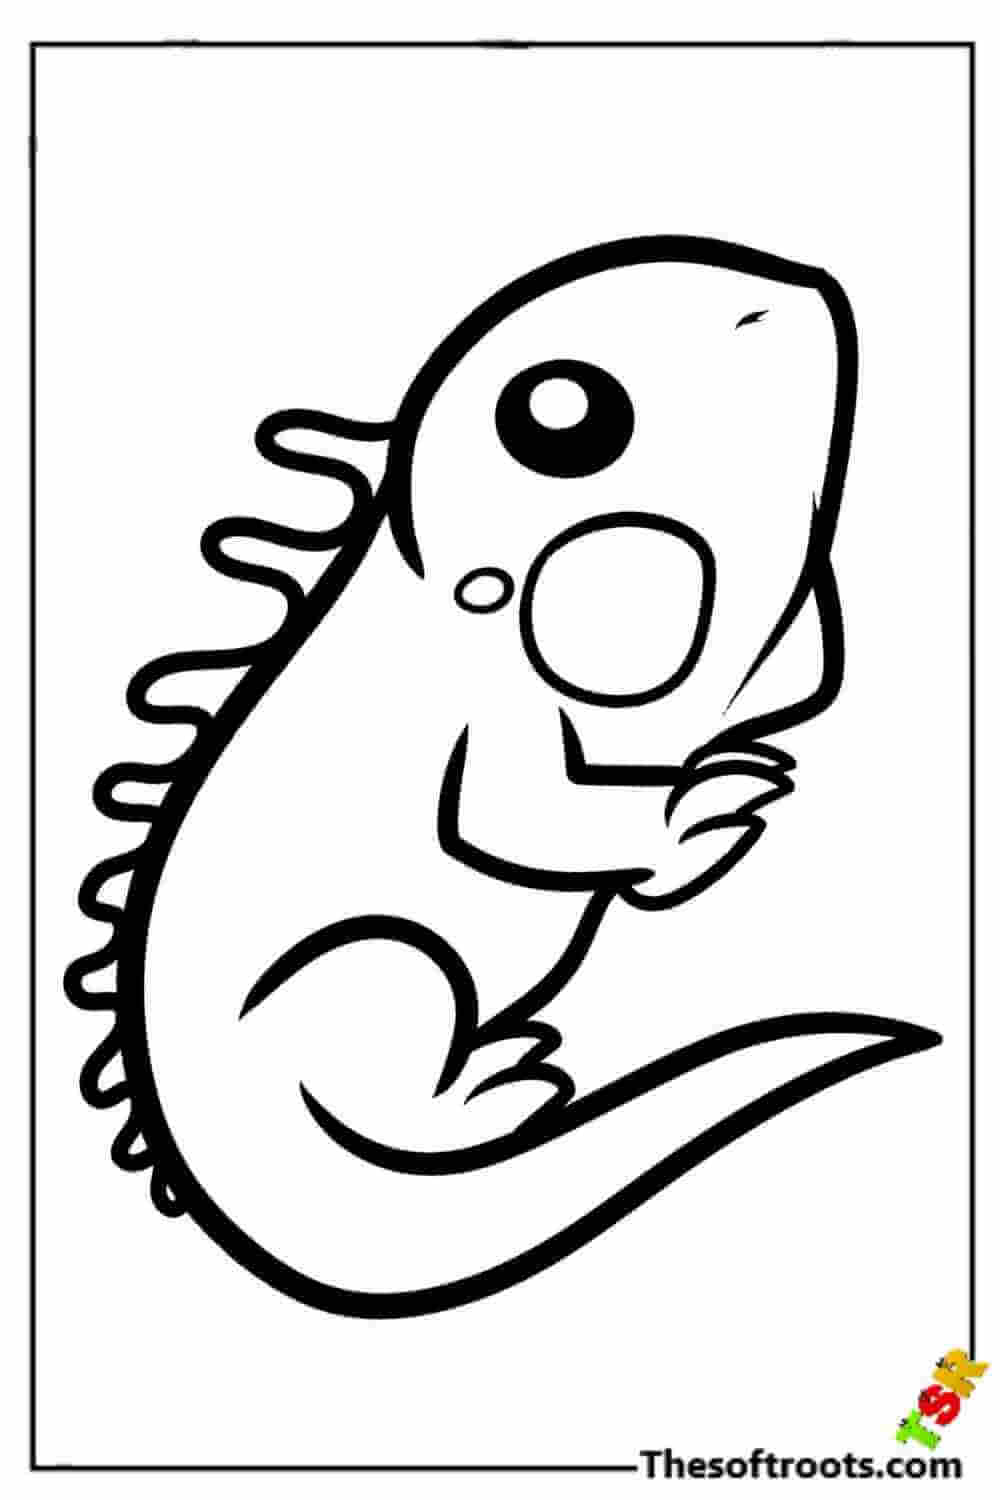 Lizard coloring pages kids coloring pages coloring pages coloring pages for kids cute lizard